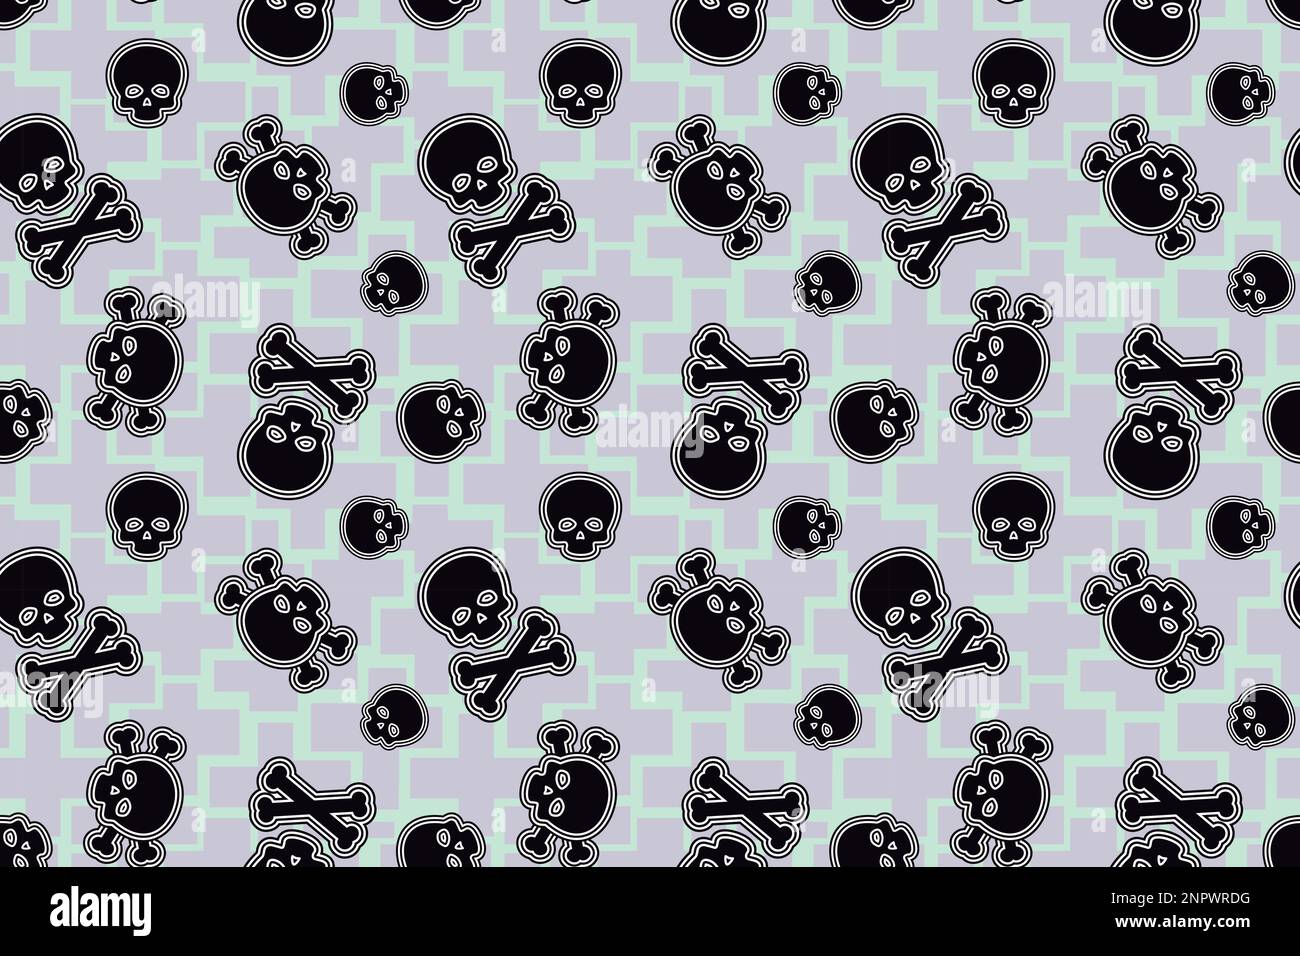 SKULL AND BONES DESIGN PATTERN, PIRATE AND POISON SYMBOL Stock Vector